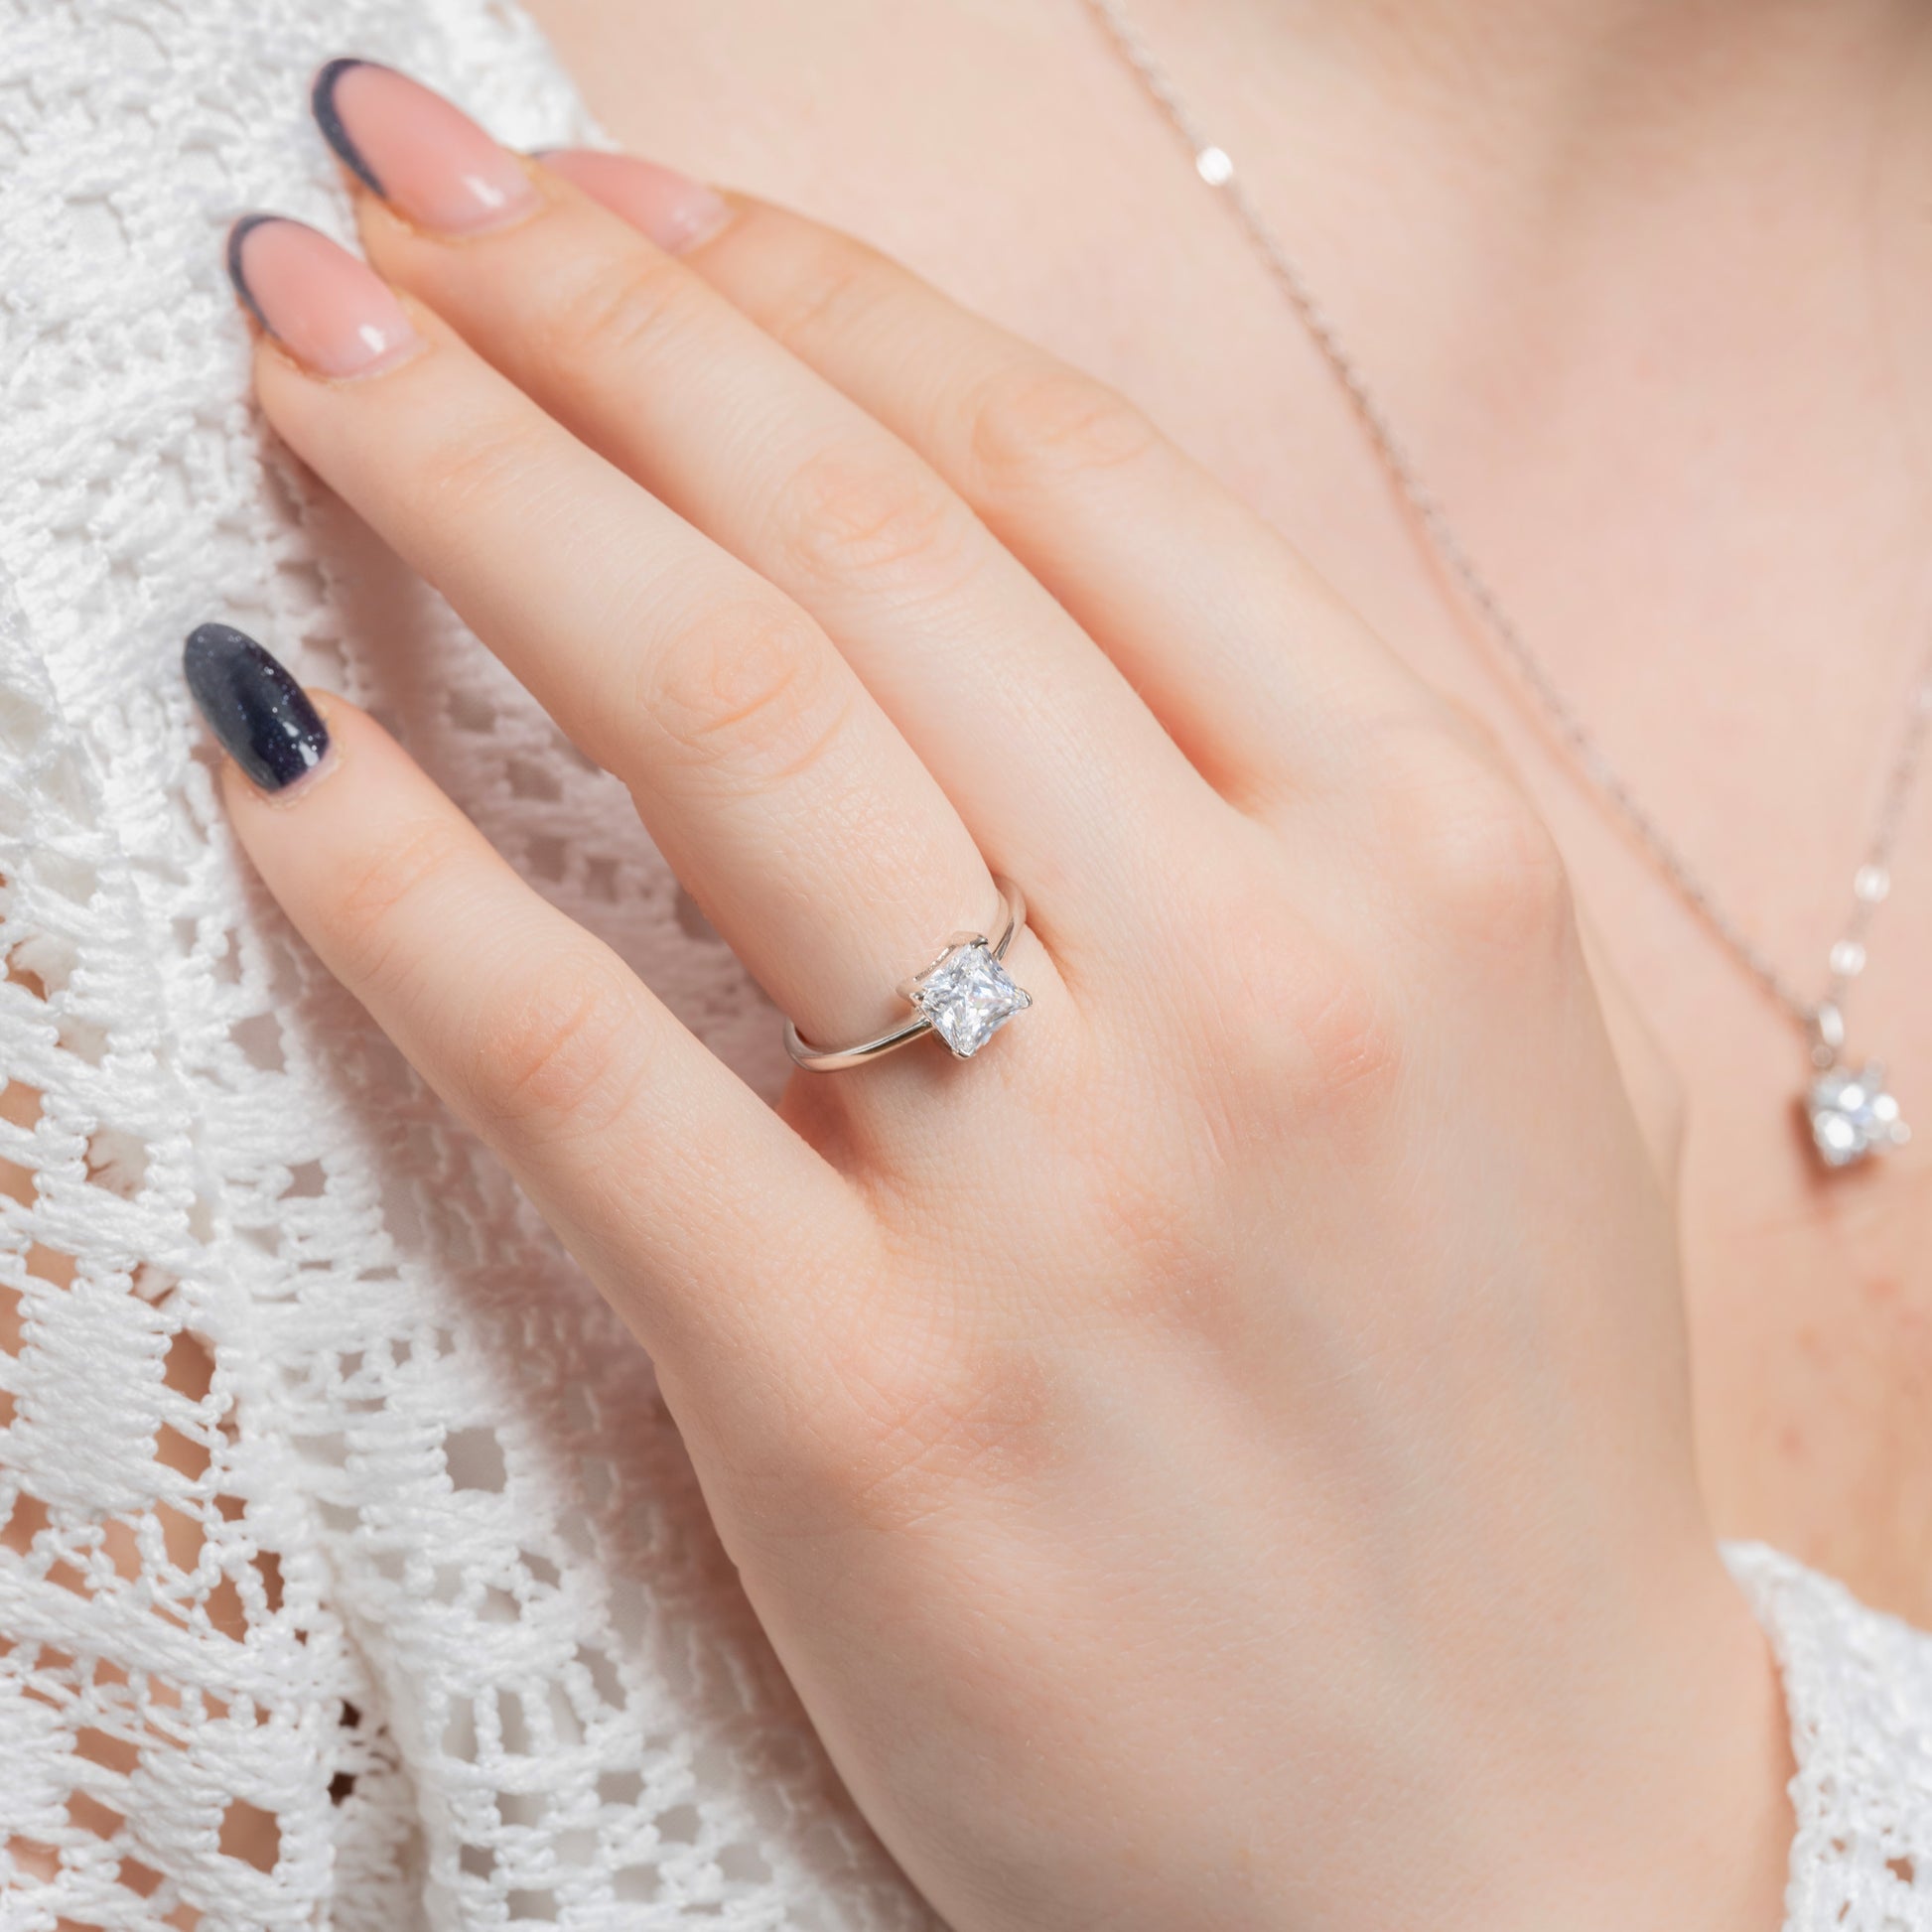 A model wearing Princess Cut Silver Ring on her ring finger